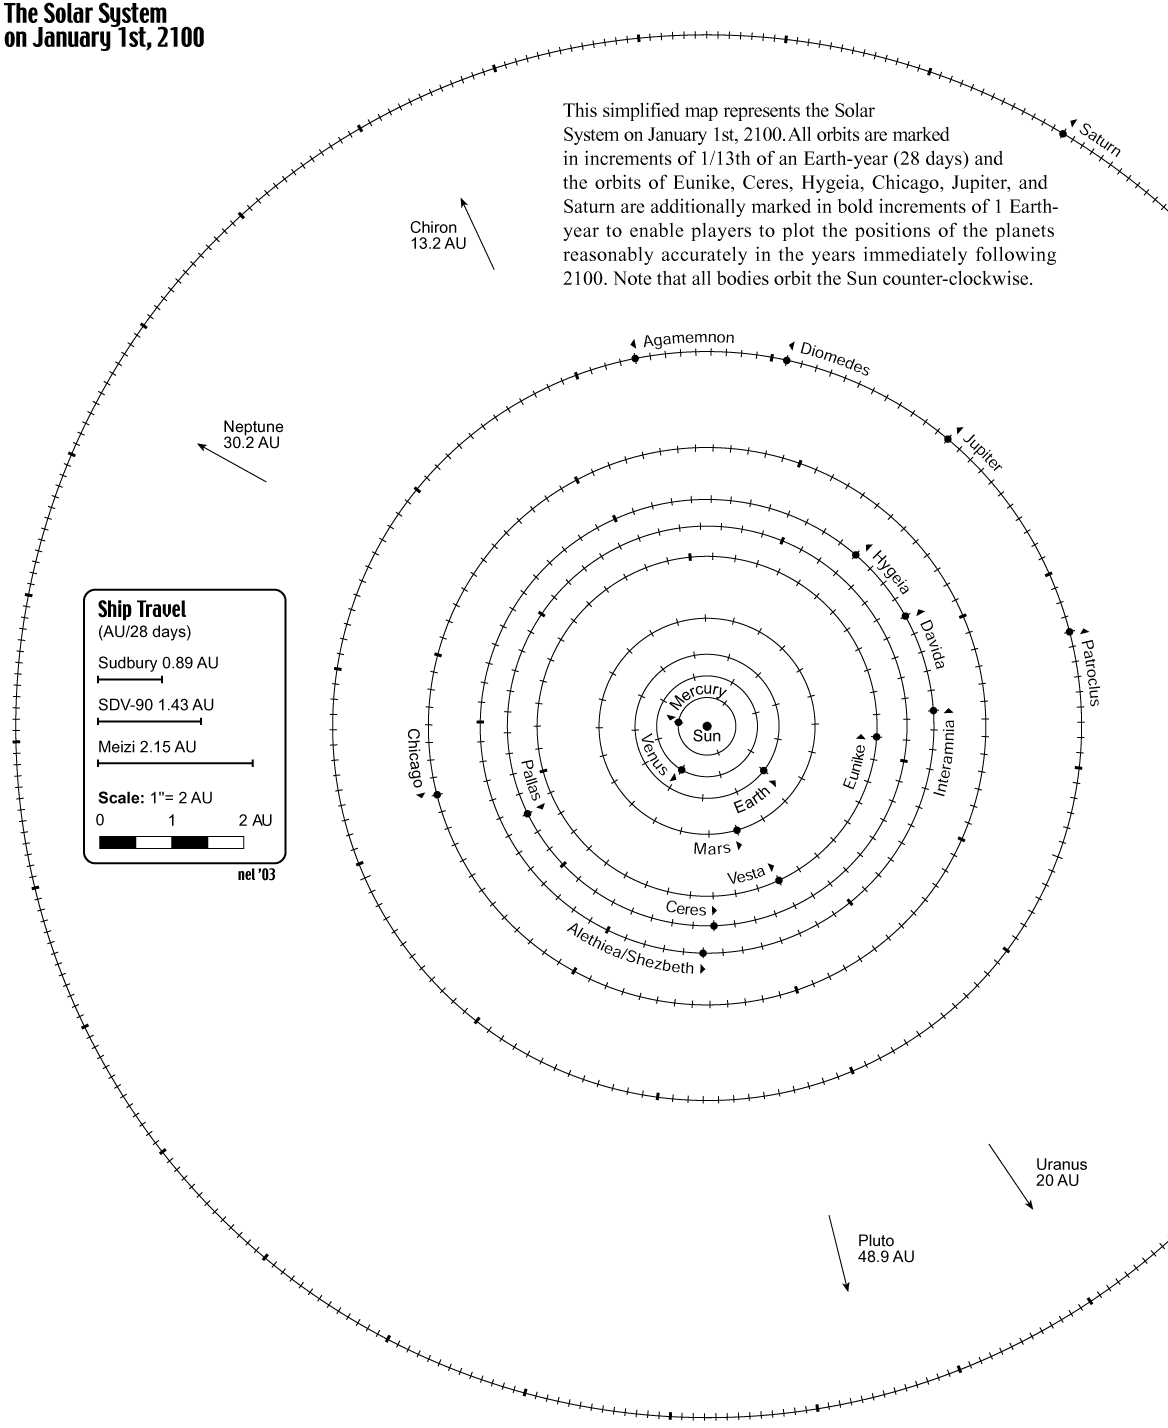 Corrected Solar System map